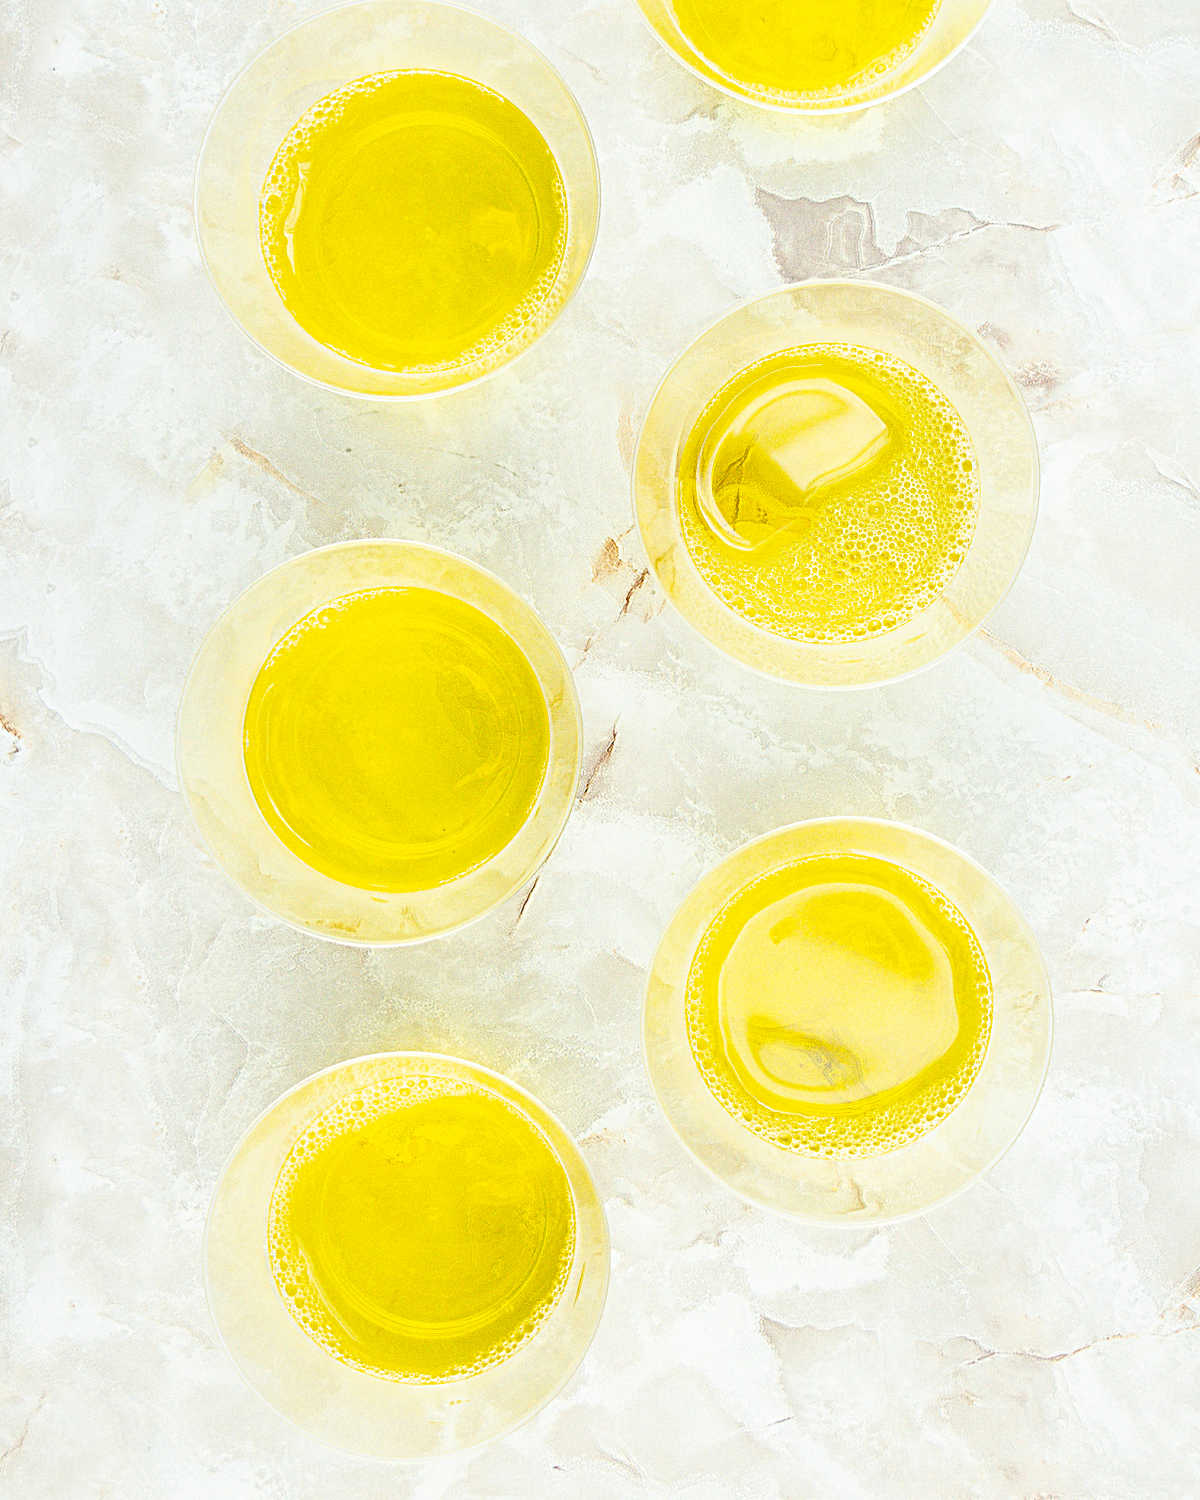 Top view of glass cups with yellow jello. White grey marbled surface. 